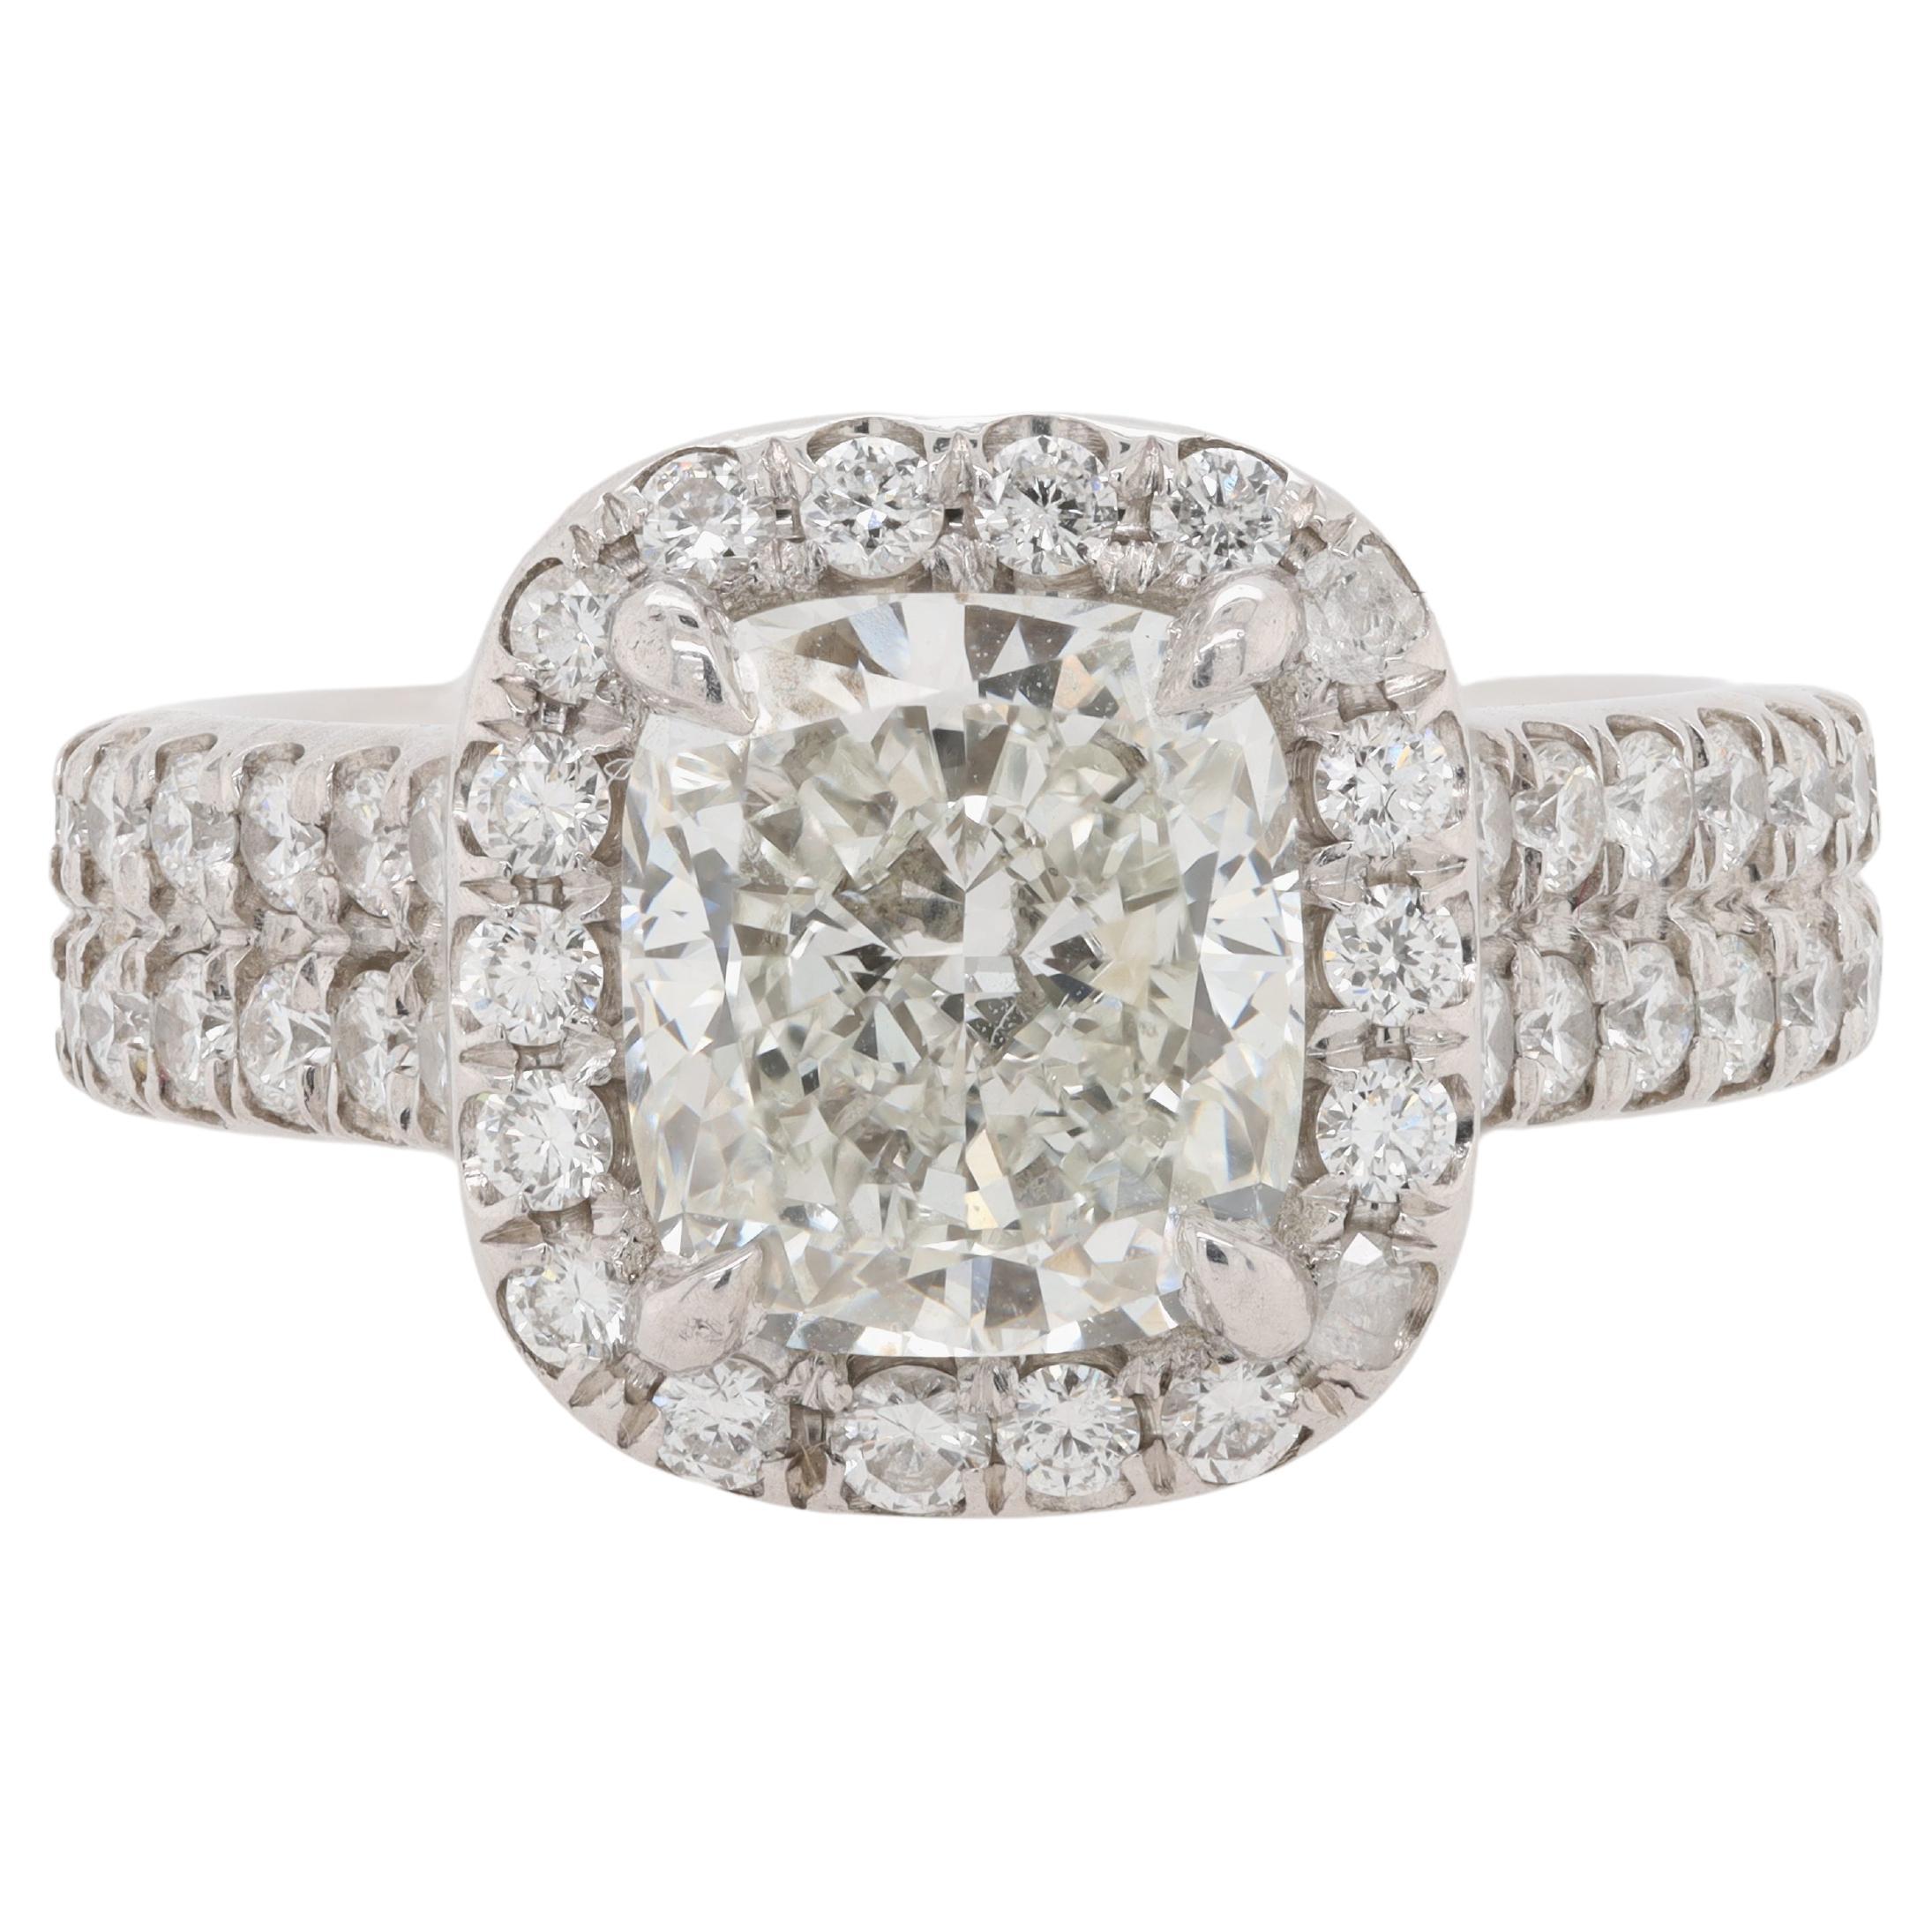 Diana M. Platinum engagement ring featuring a center 2.01 ct GIA certified  For Sale